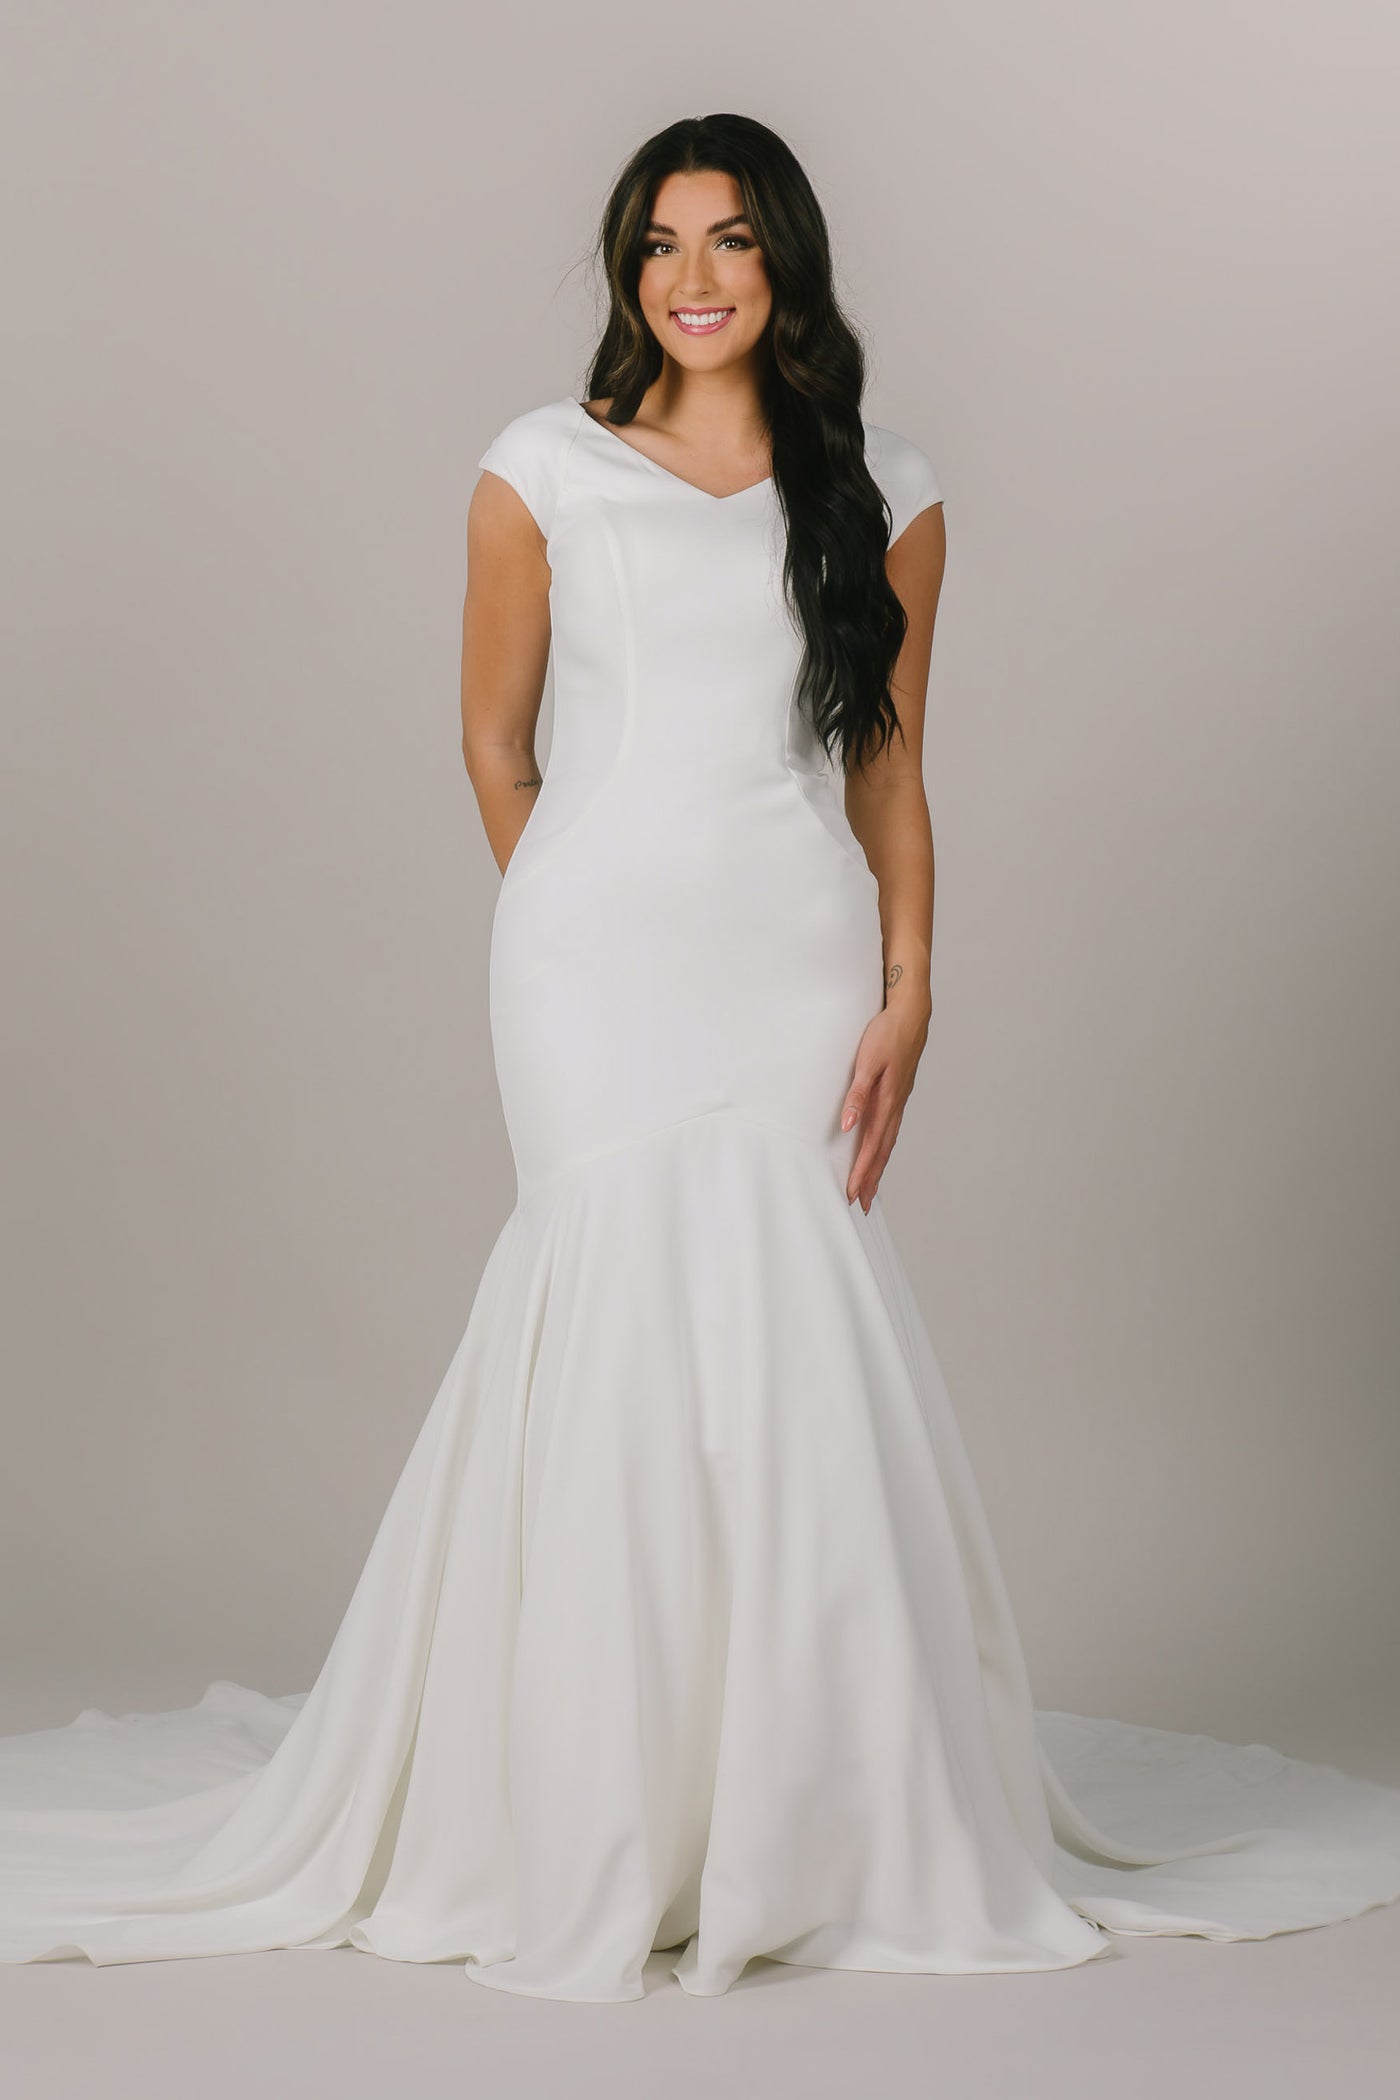 A brunette modeling standing with her arms to her side wearing a fit and flare modest wedding dress with a v neckline. 